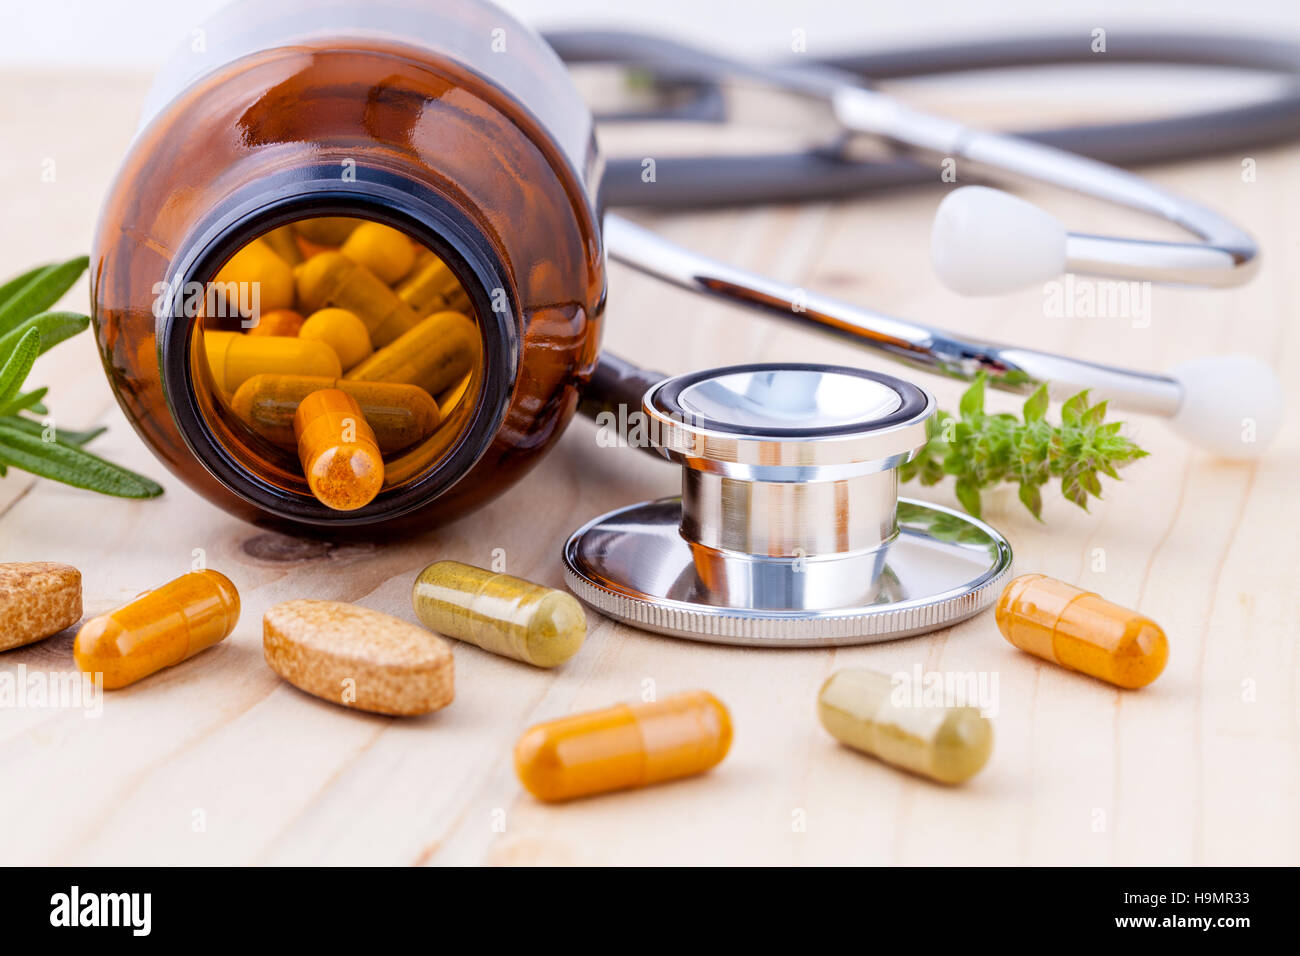 capsule of herbal medicine alternative healthy care with stethos Stock Photo